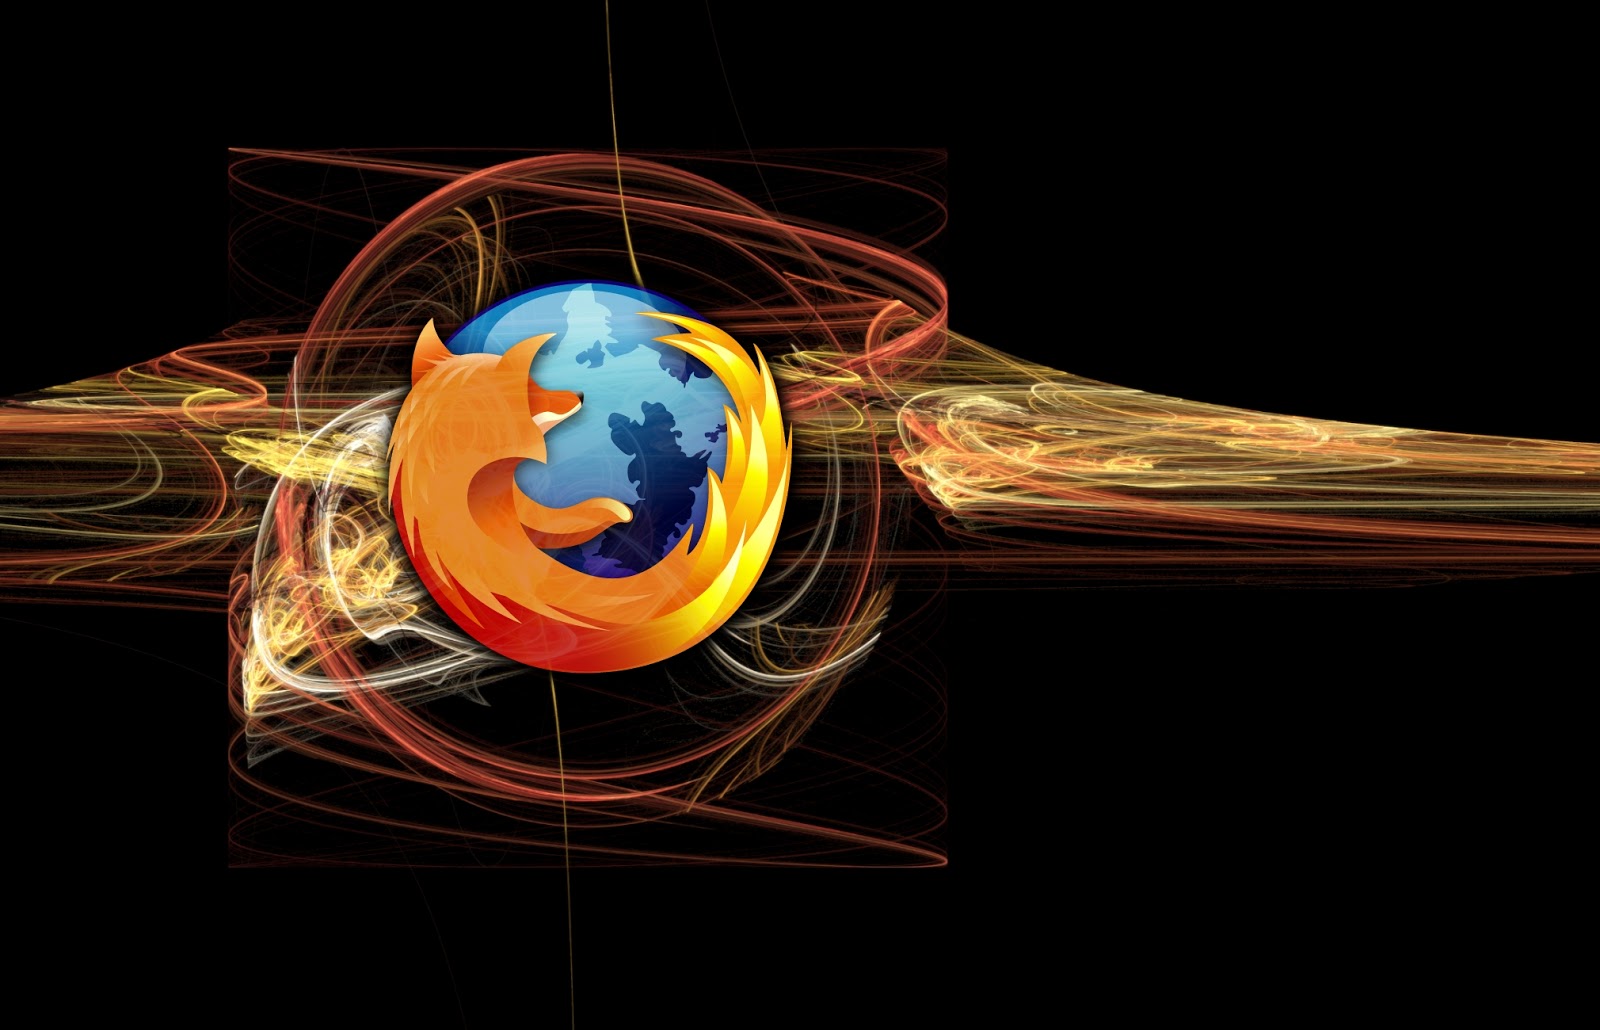 Mozilla Firefox Browser And Wallpaper